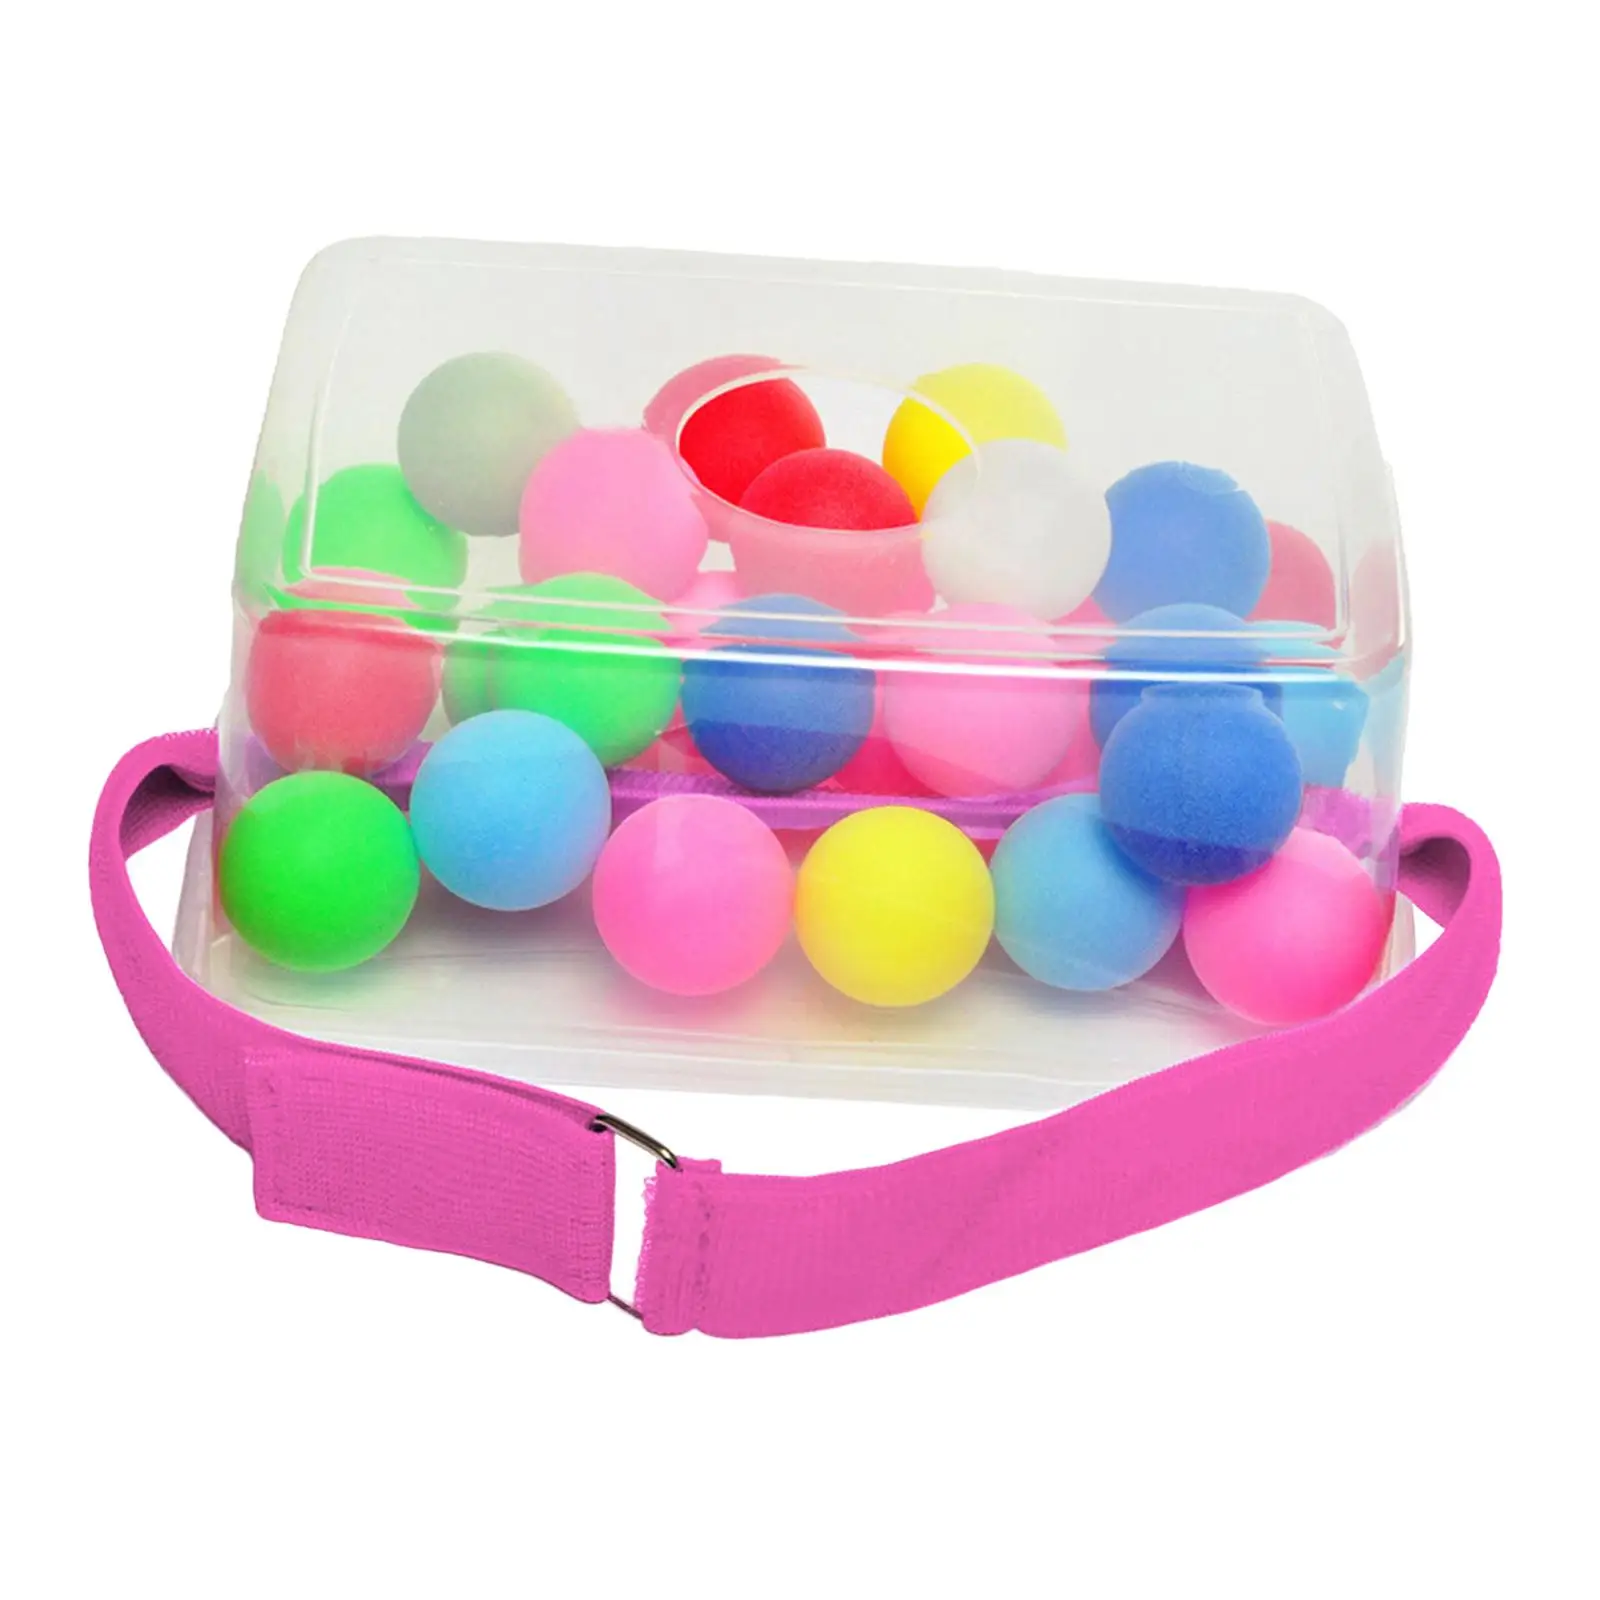 Shaking Swing Balls Game Fun Family Game Set for Beach Easter Party Playset